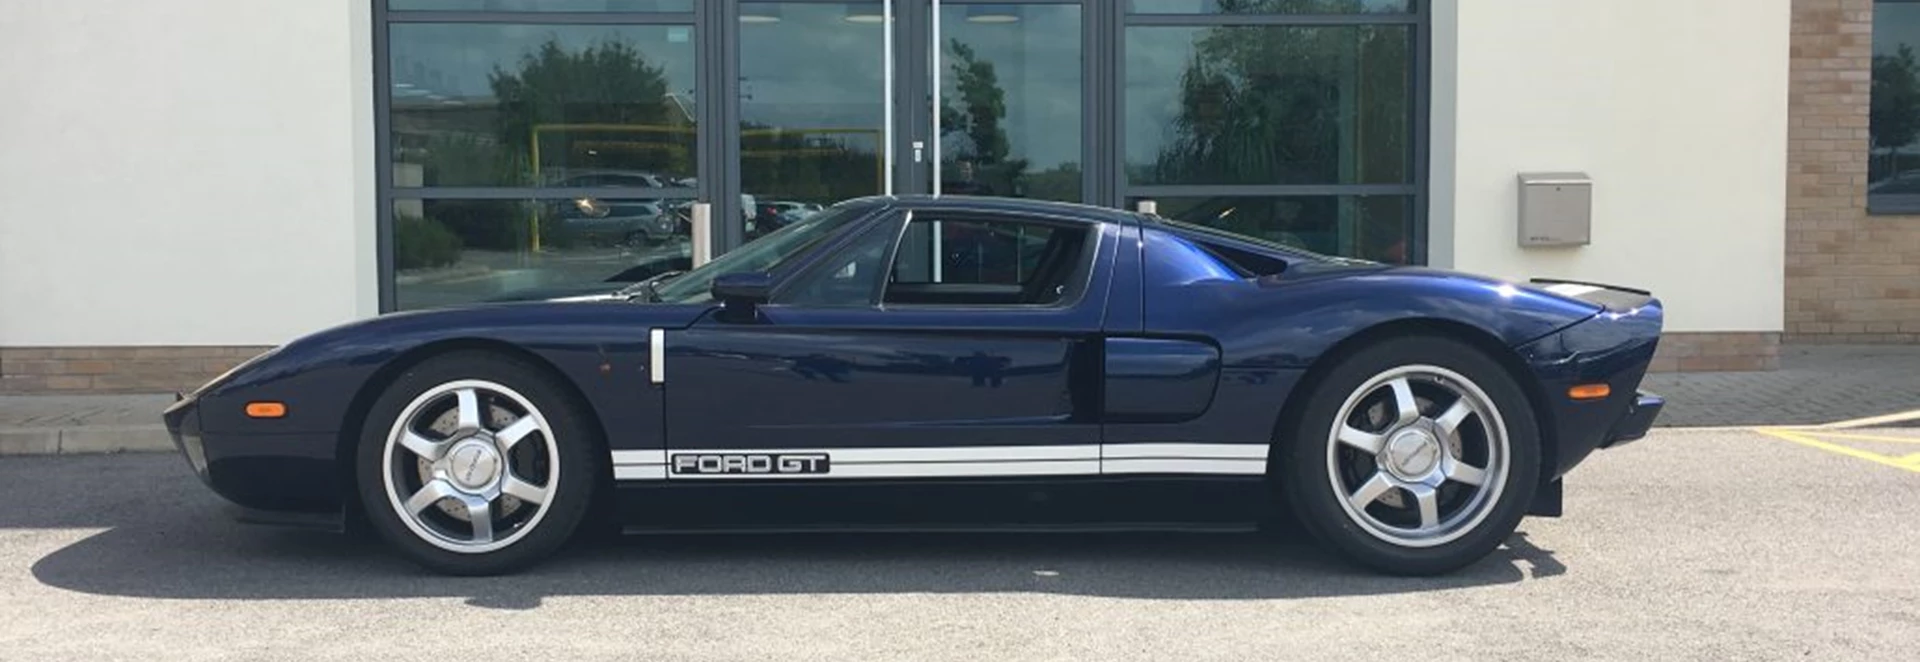 Jeremy Clarkson’s Ford GT is up for Sale 